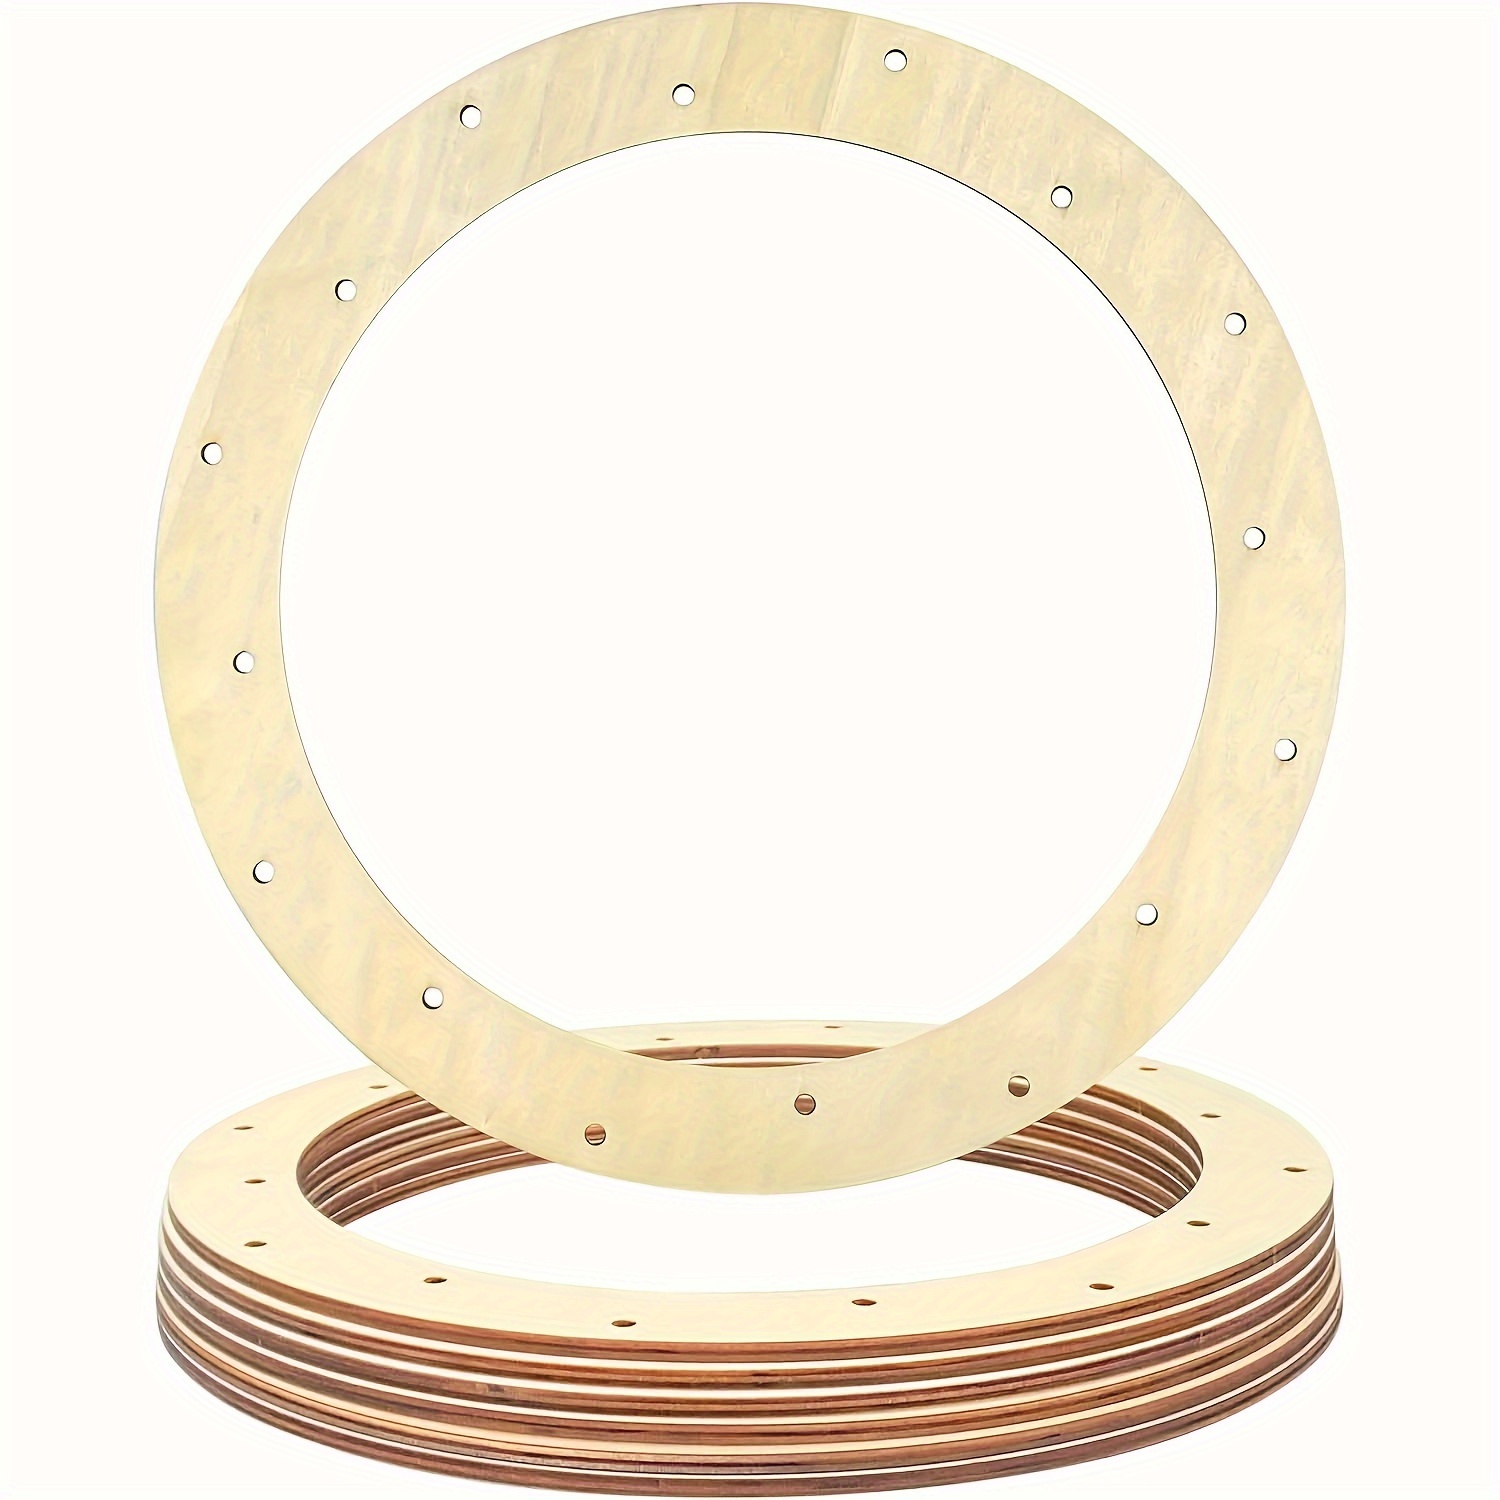 

6-pack 12" Unpainted Wooden Wreath Frames With 16 Holes - Diy Craft Rings For Floral Arrangements, Home Decor & Party Centerpieces